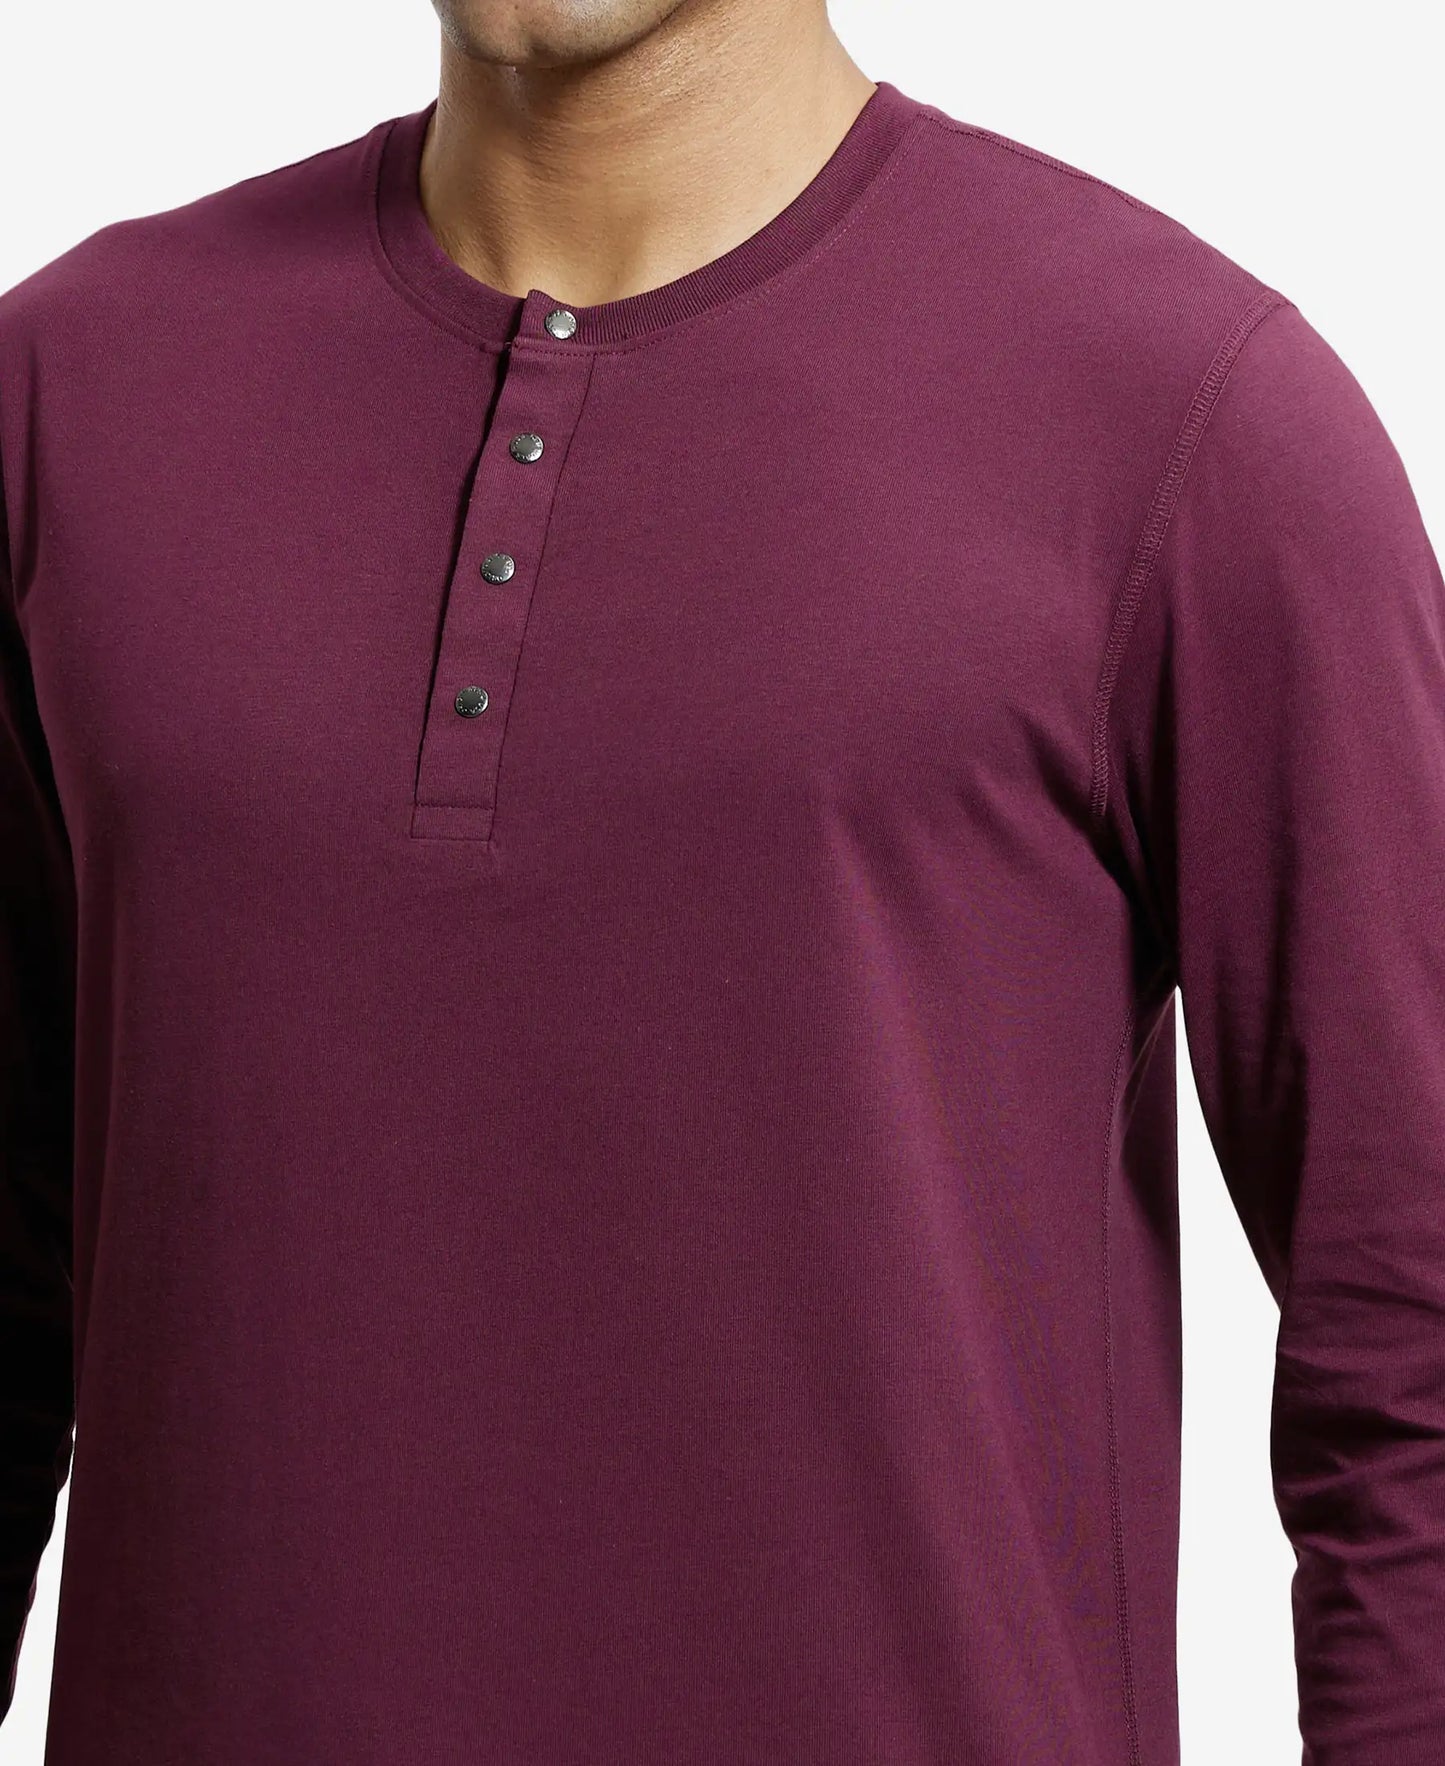 Super Combed Cotton Rich Solid Full Sleeve Henley T-Shirt - Wine Tasting-6